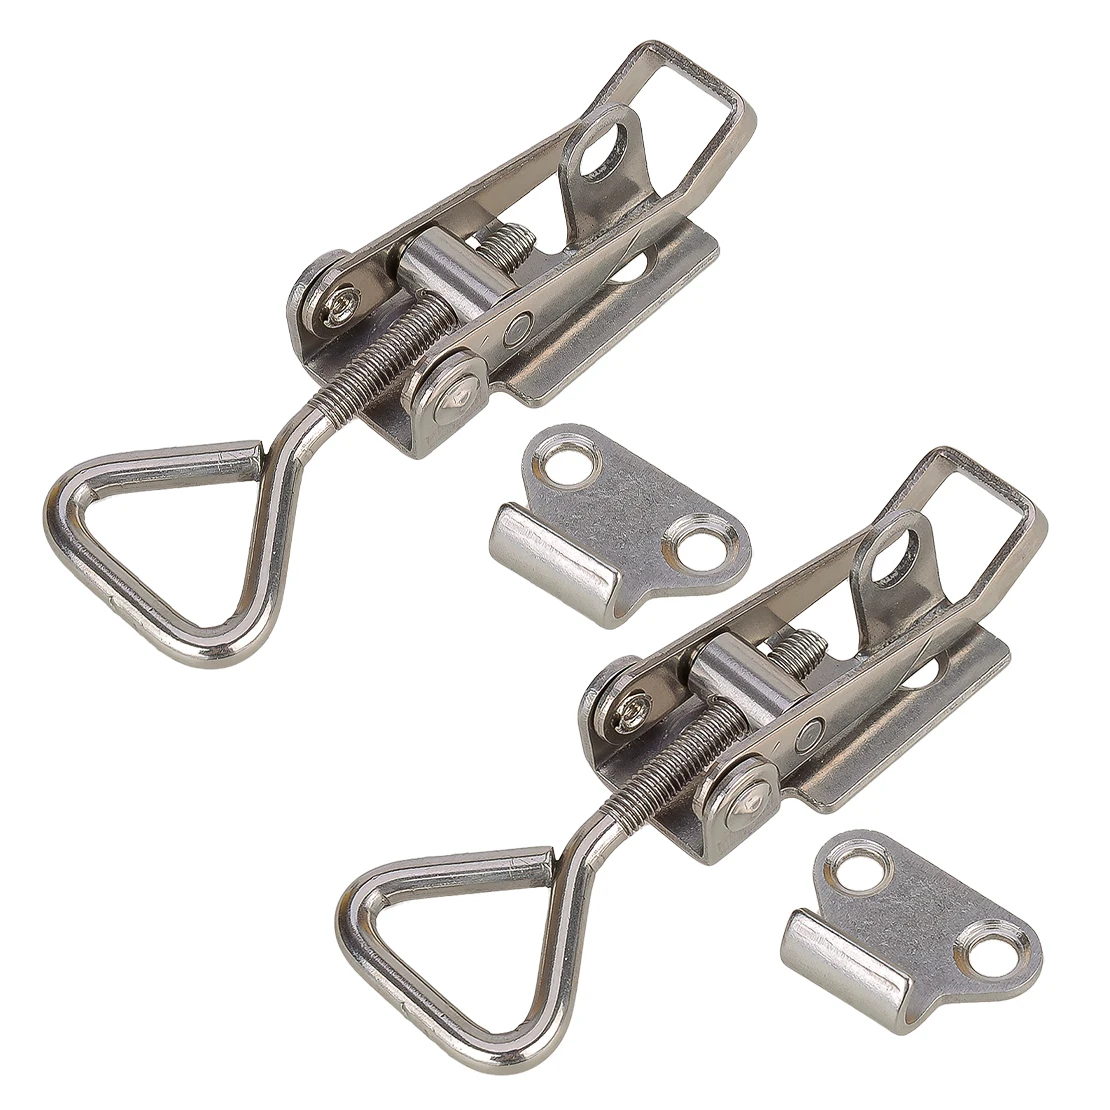 

2 Sets Small Marine Toggle Latch Buckles with Keyhole Fastener Clamps for Boat Yacht RV Deck and Cabin Hardware Stainless Steel